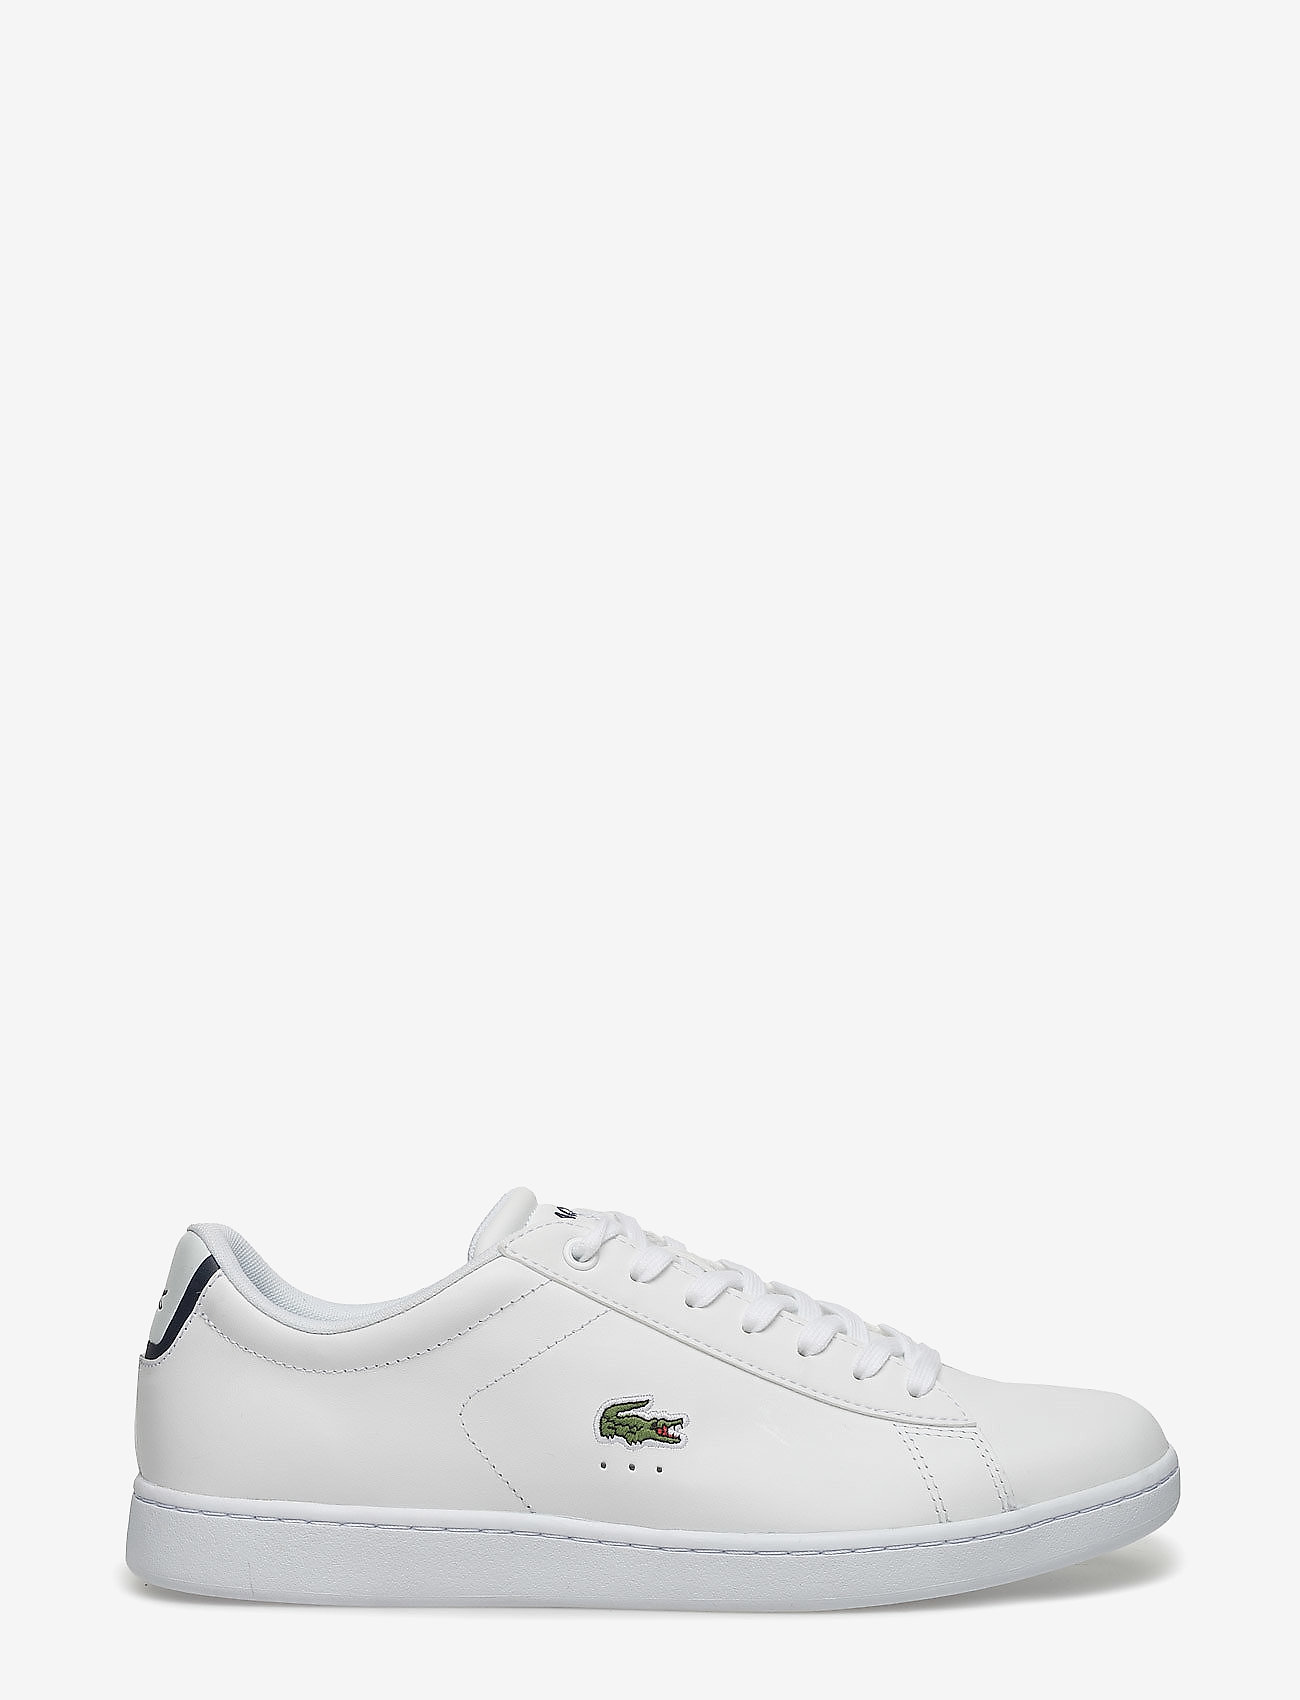 pessimist gøre ondt Mudret Lacoste Shoes Carnaby Evo Bl 1 Sma - Low Tops | Boozt.com